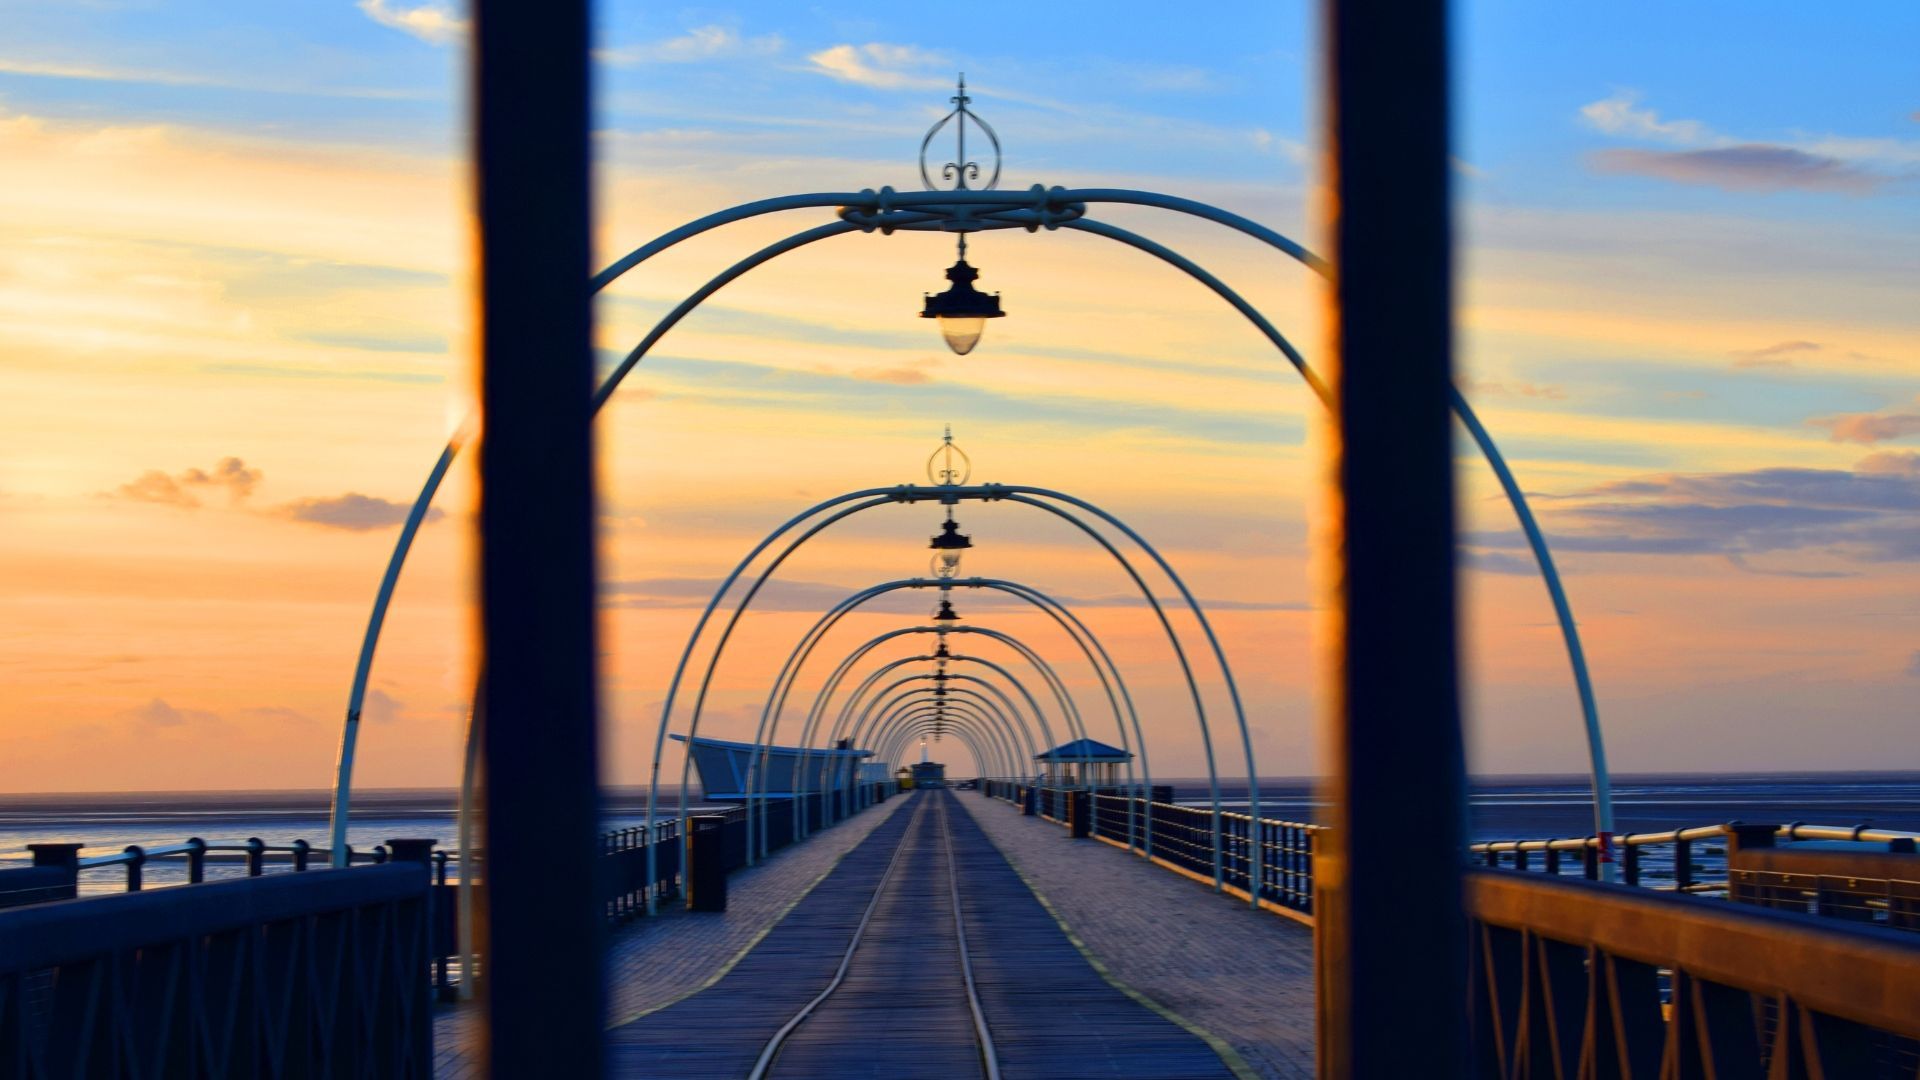 Want to explore the beautiful Sefton Coast? Here are 2 incredible walking trails near Southport